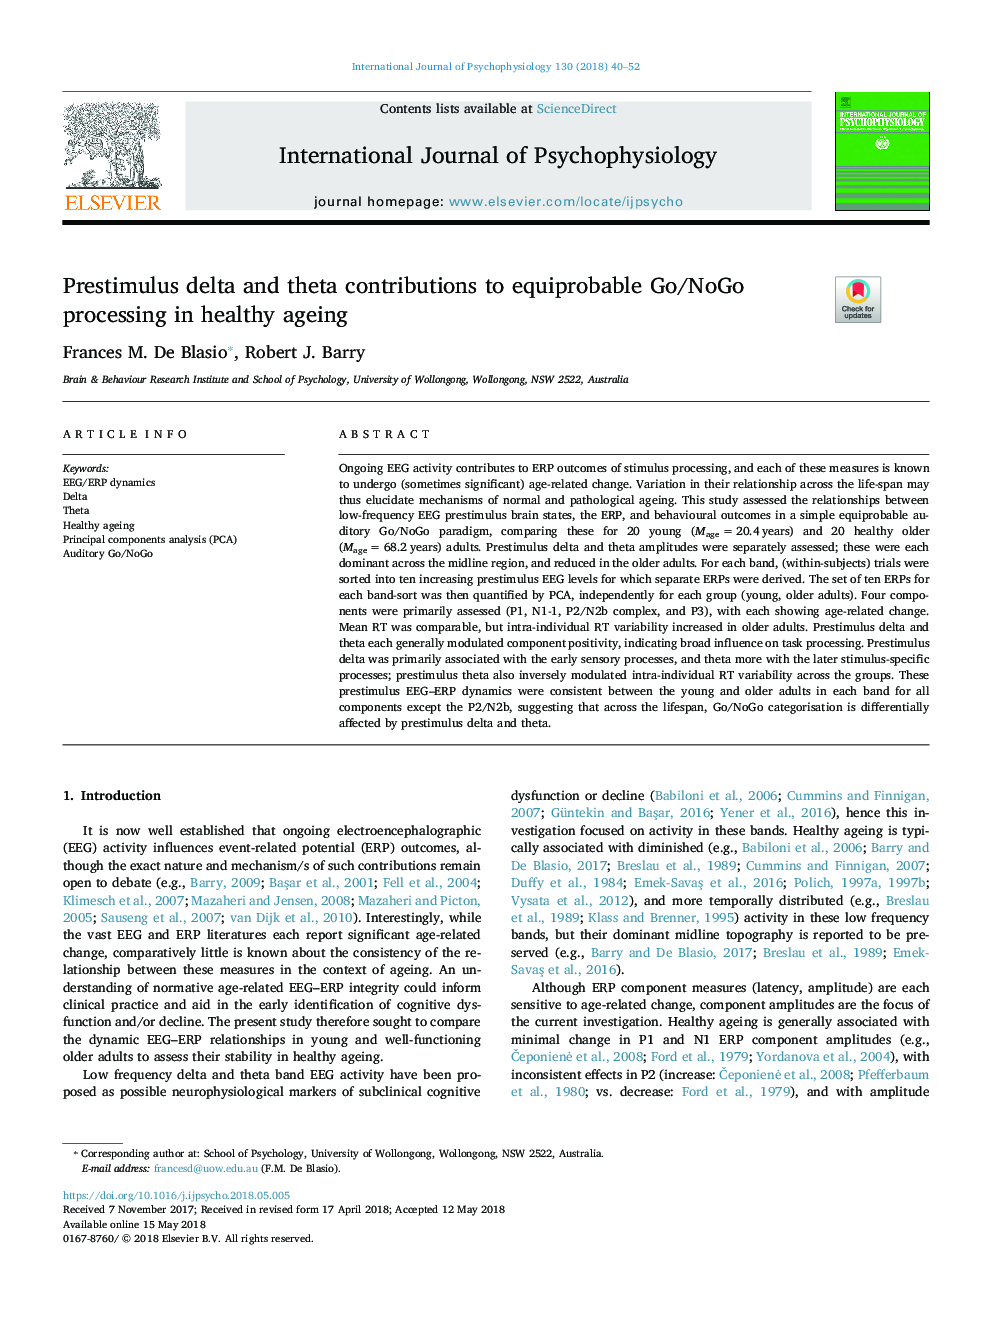 Prestimulus delta and theta contributions to equiprobable Go/NoGo processing in healthy ageing